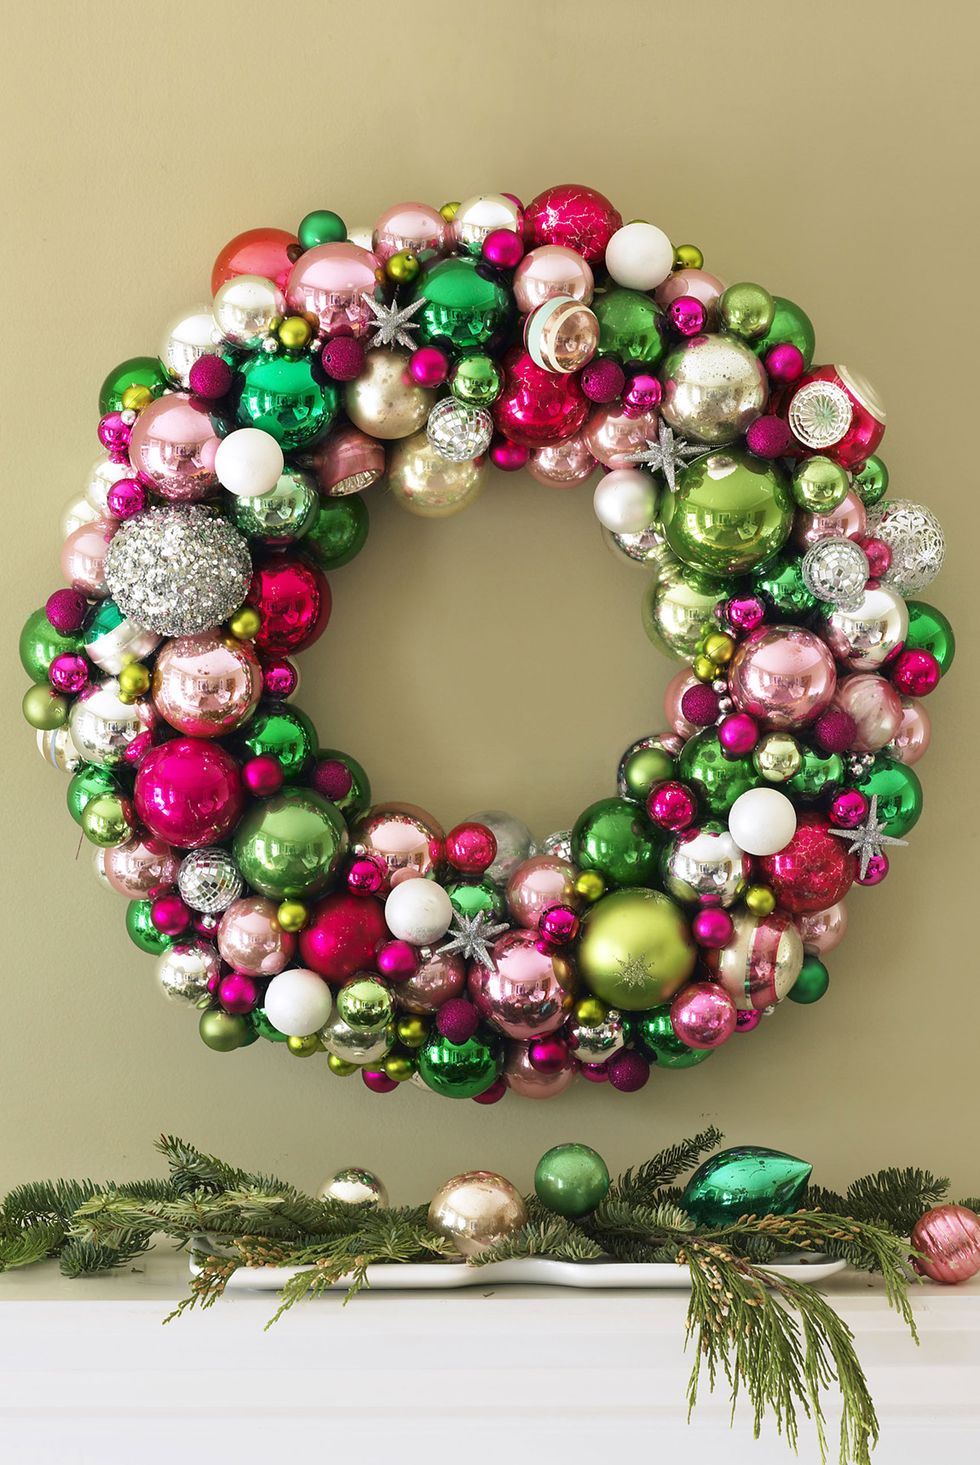 Decorative holiday containers & festive seasonal wreaths ready to go!